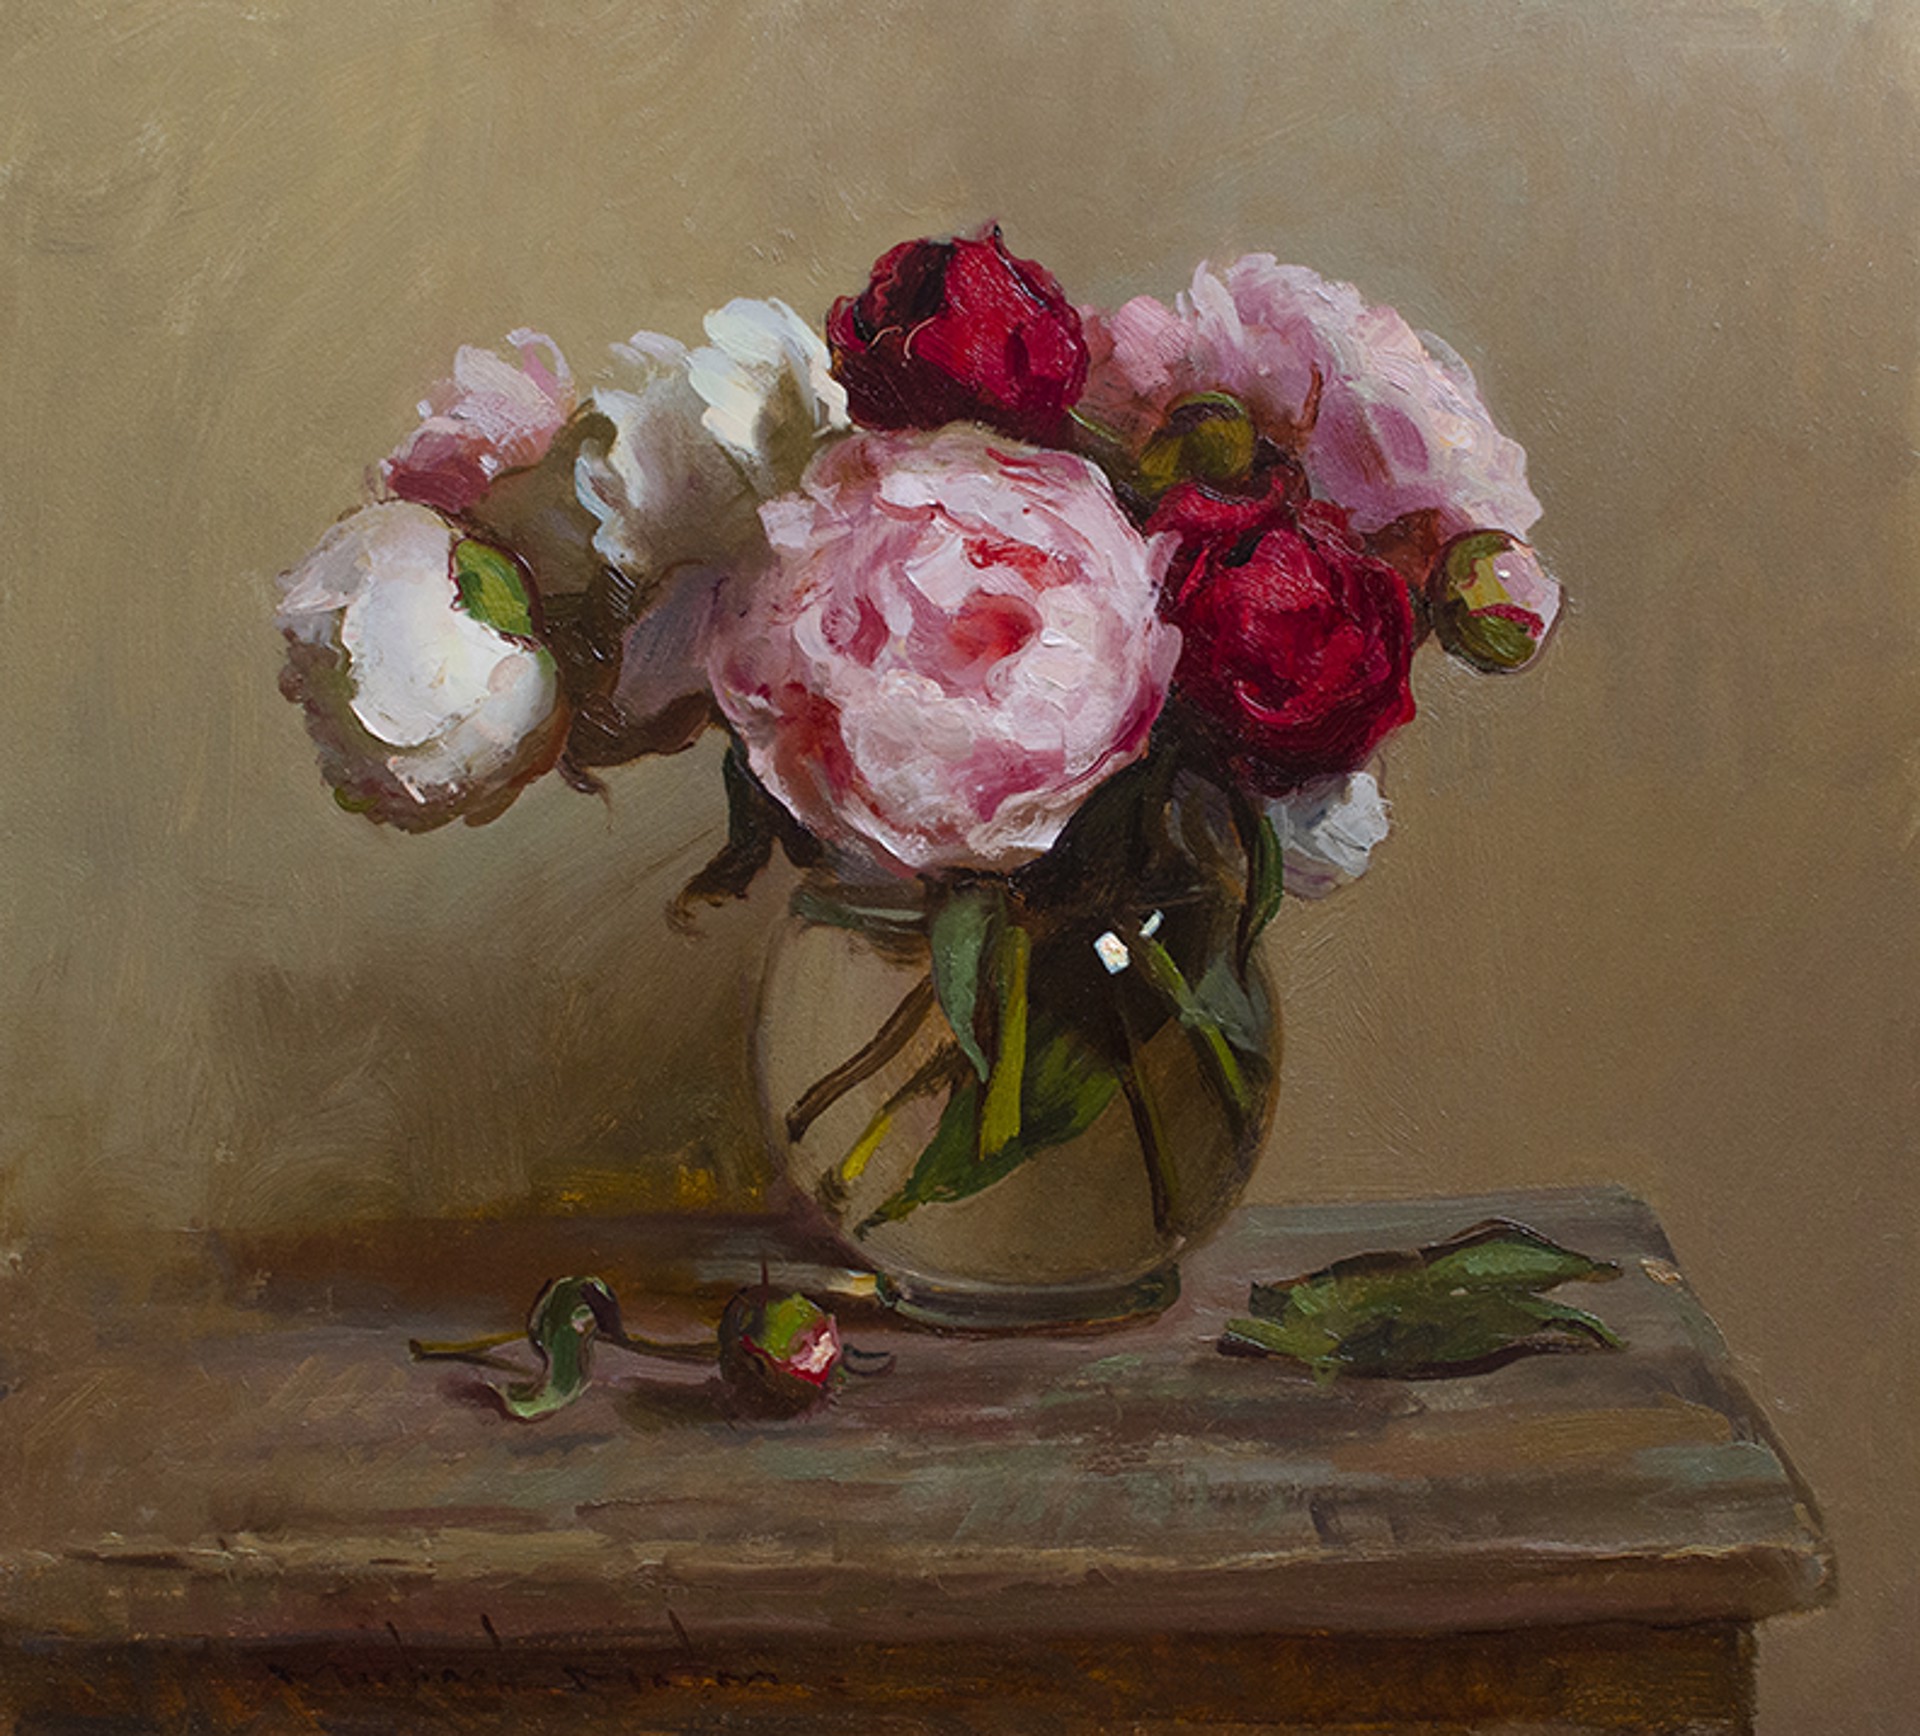 Spring Favorites by Michael Malm